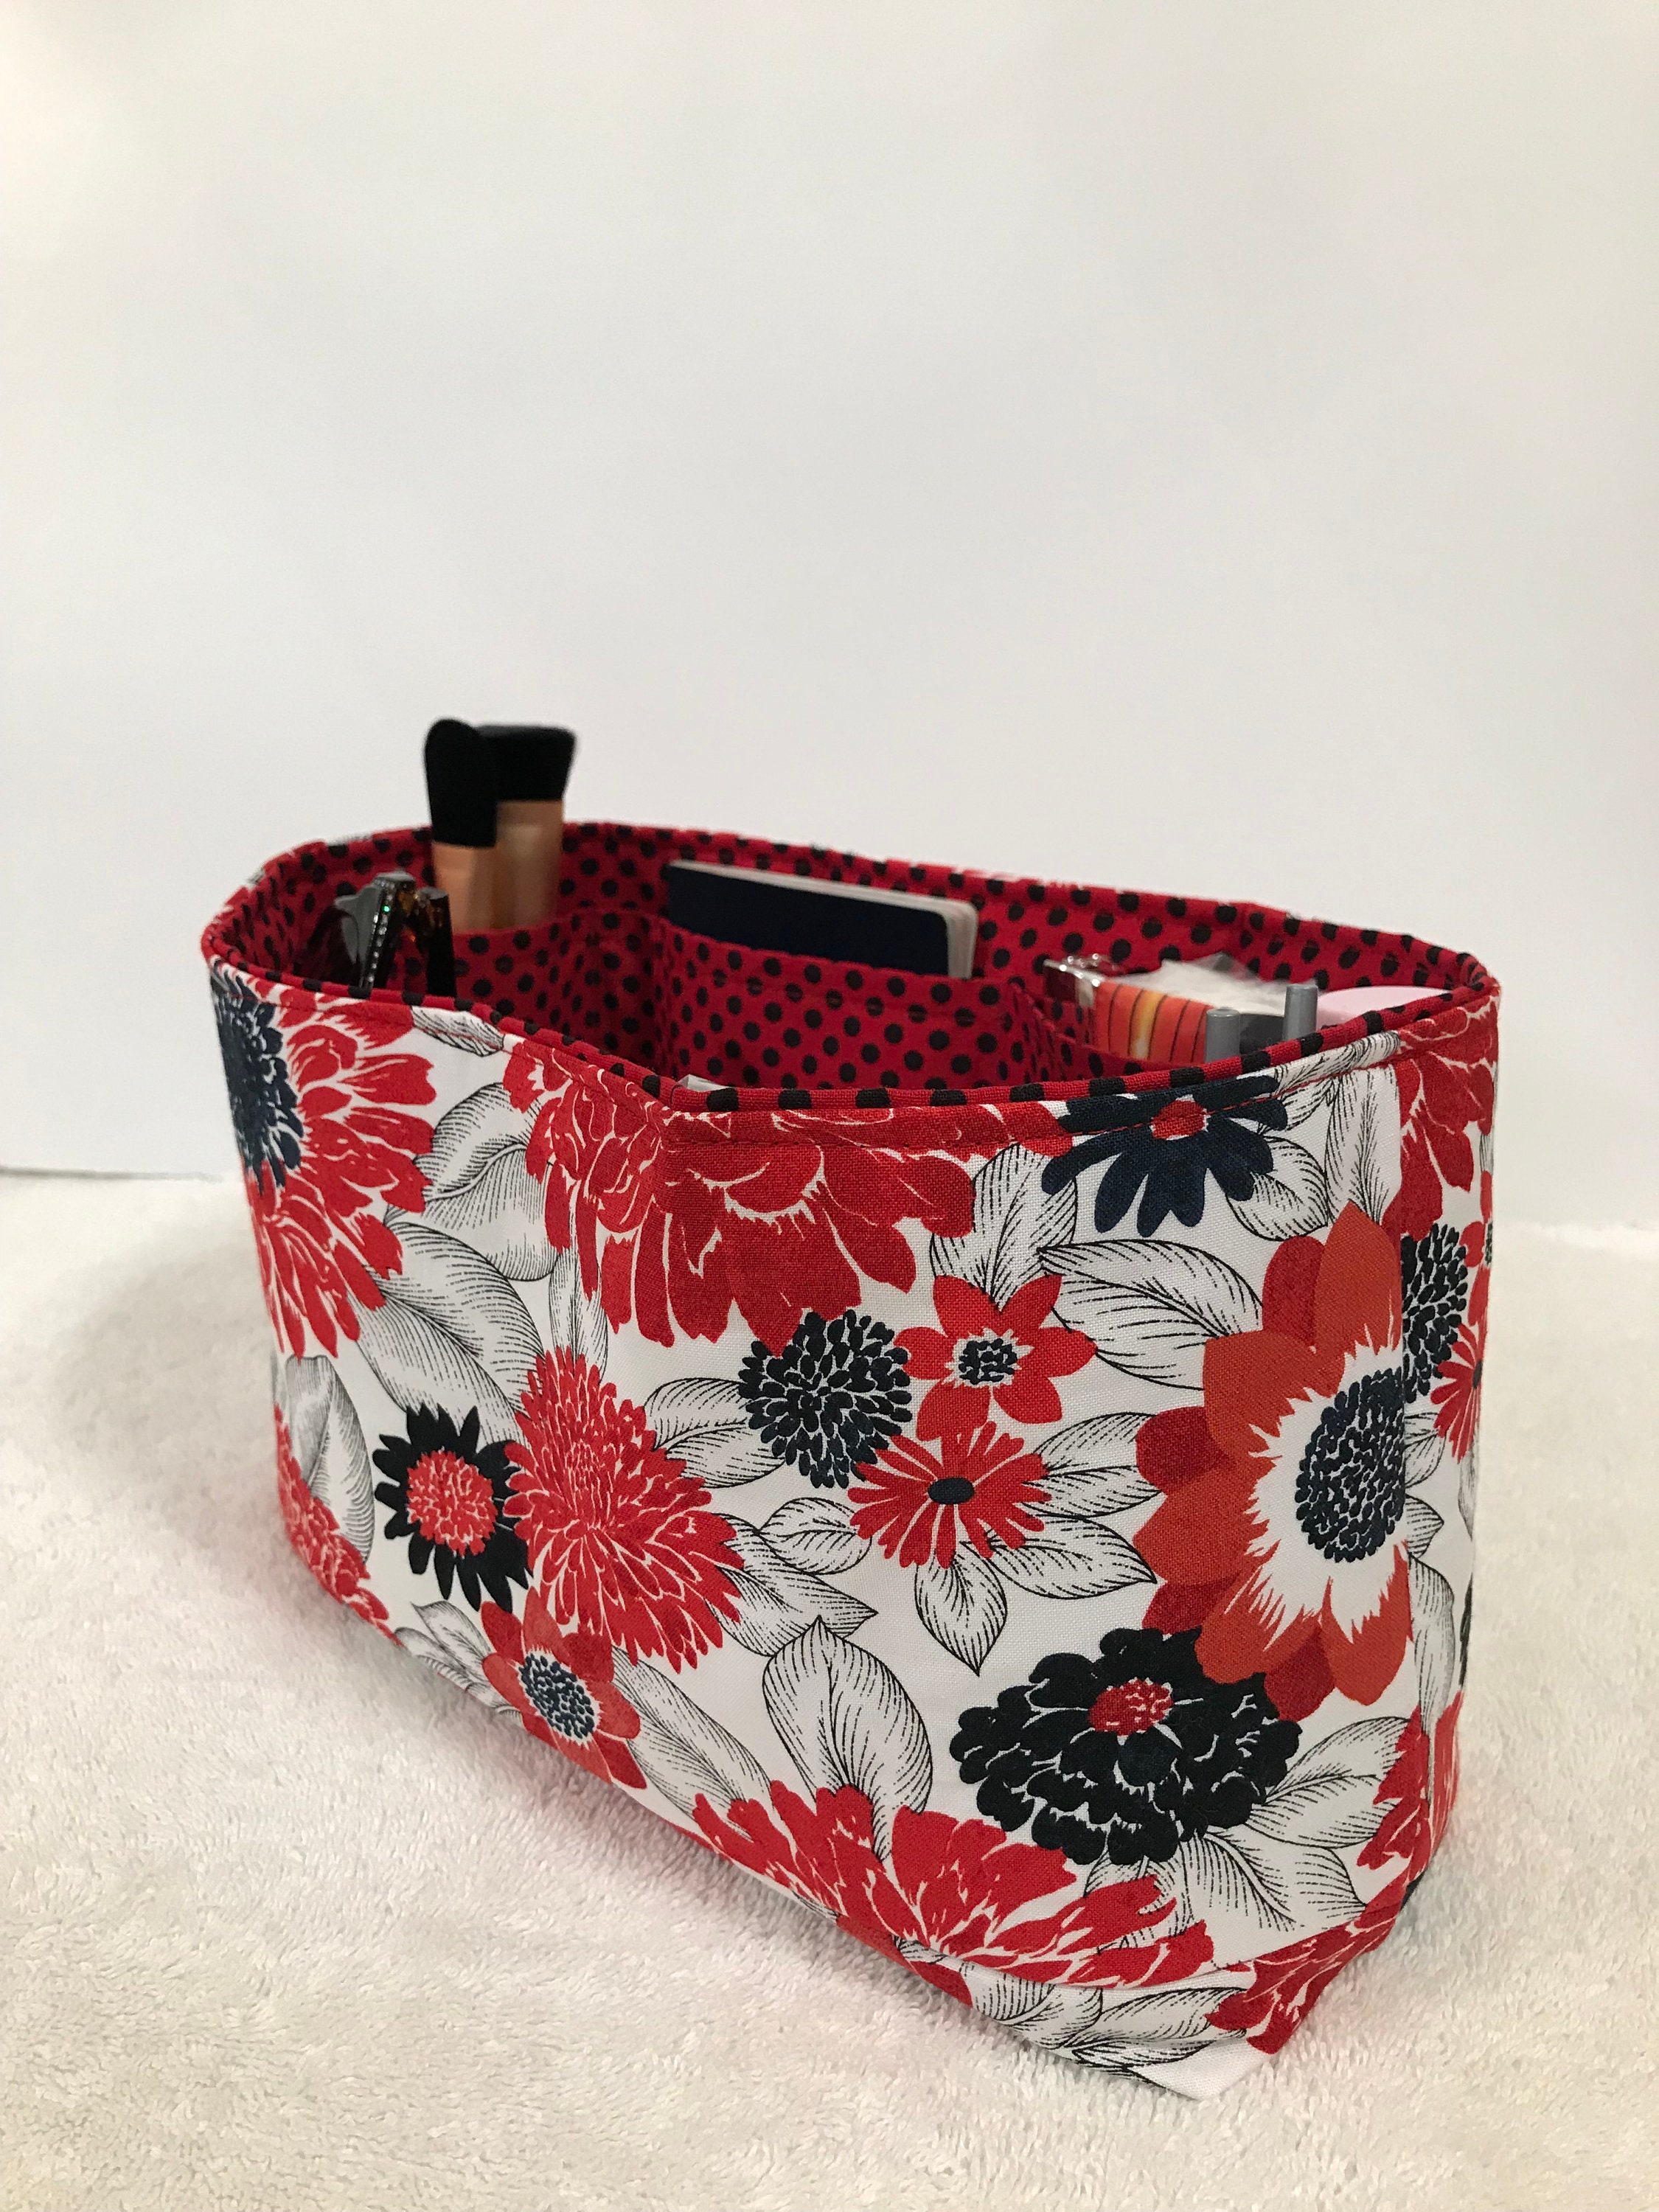 Beautiful Red Floral Red Black Dot Design Purse Organizer | Etsy